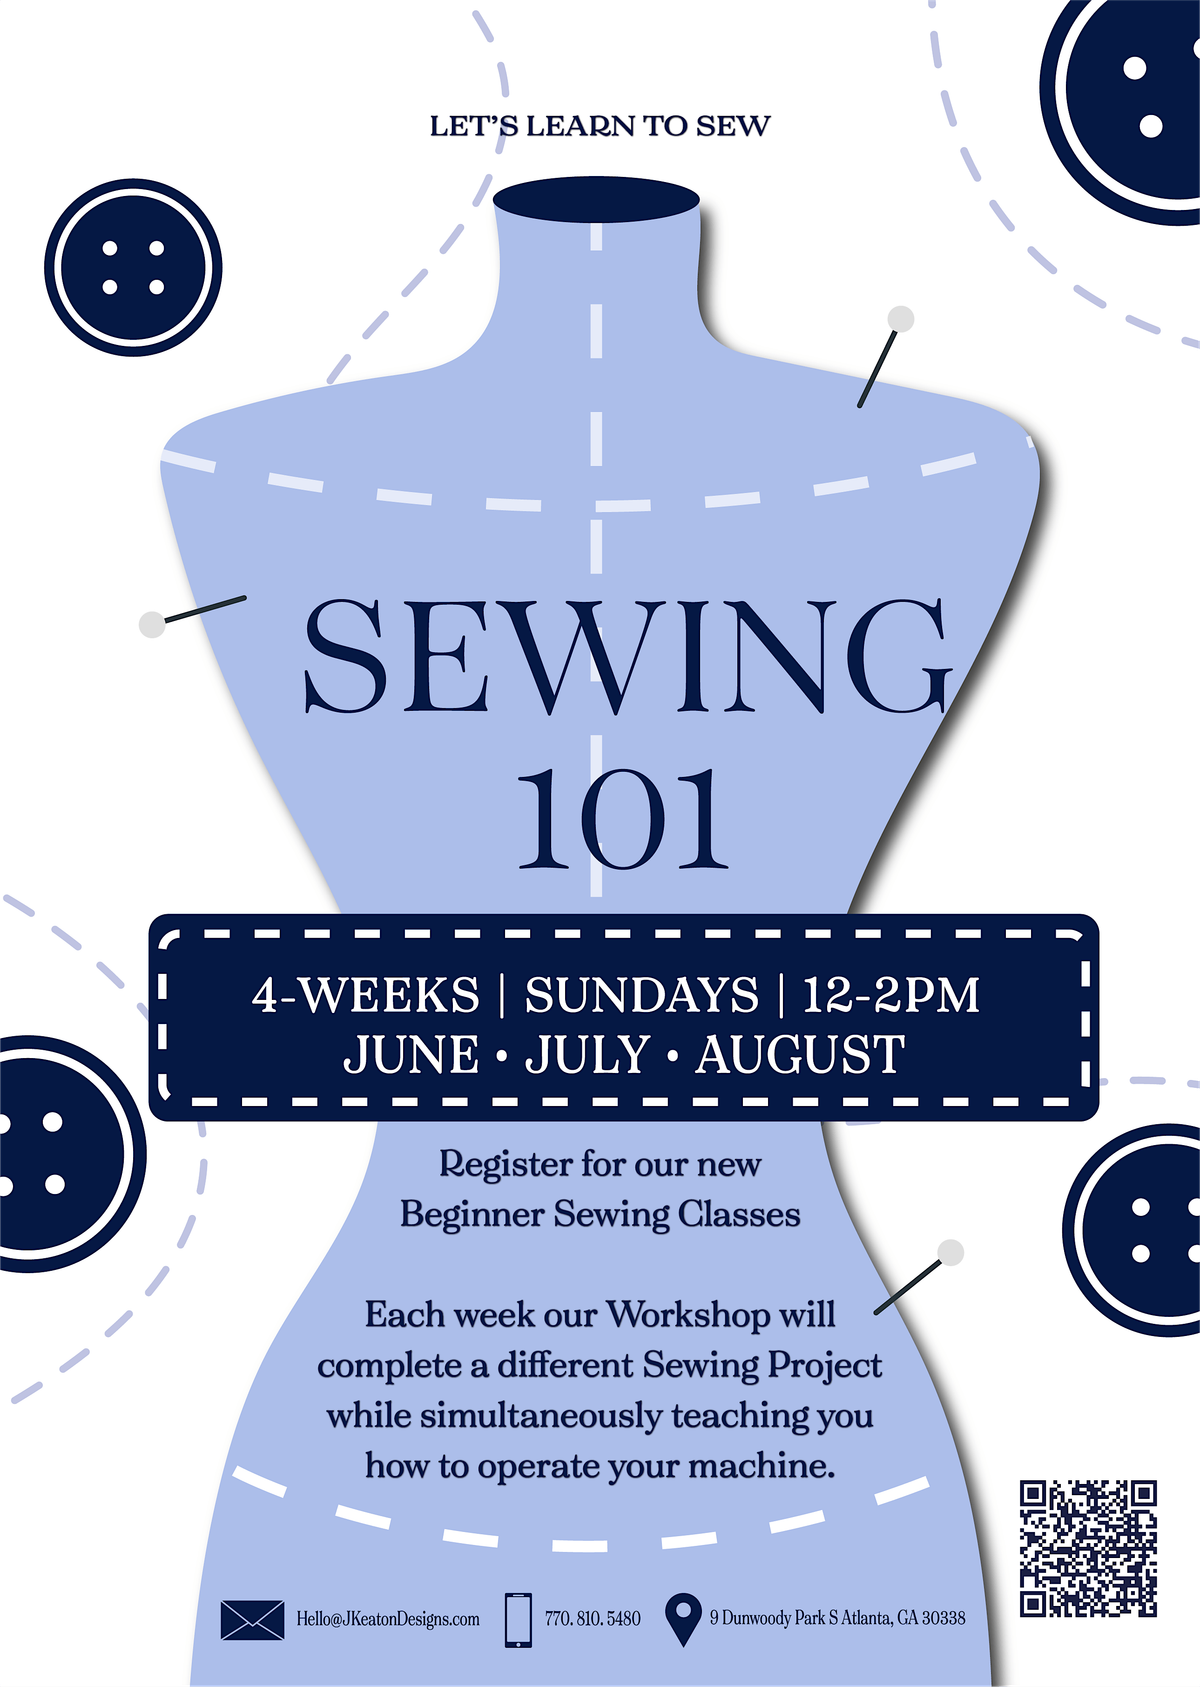 Sewing 101 | ACCELERATED CLASS | In-Person Beginner Sewing Class